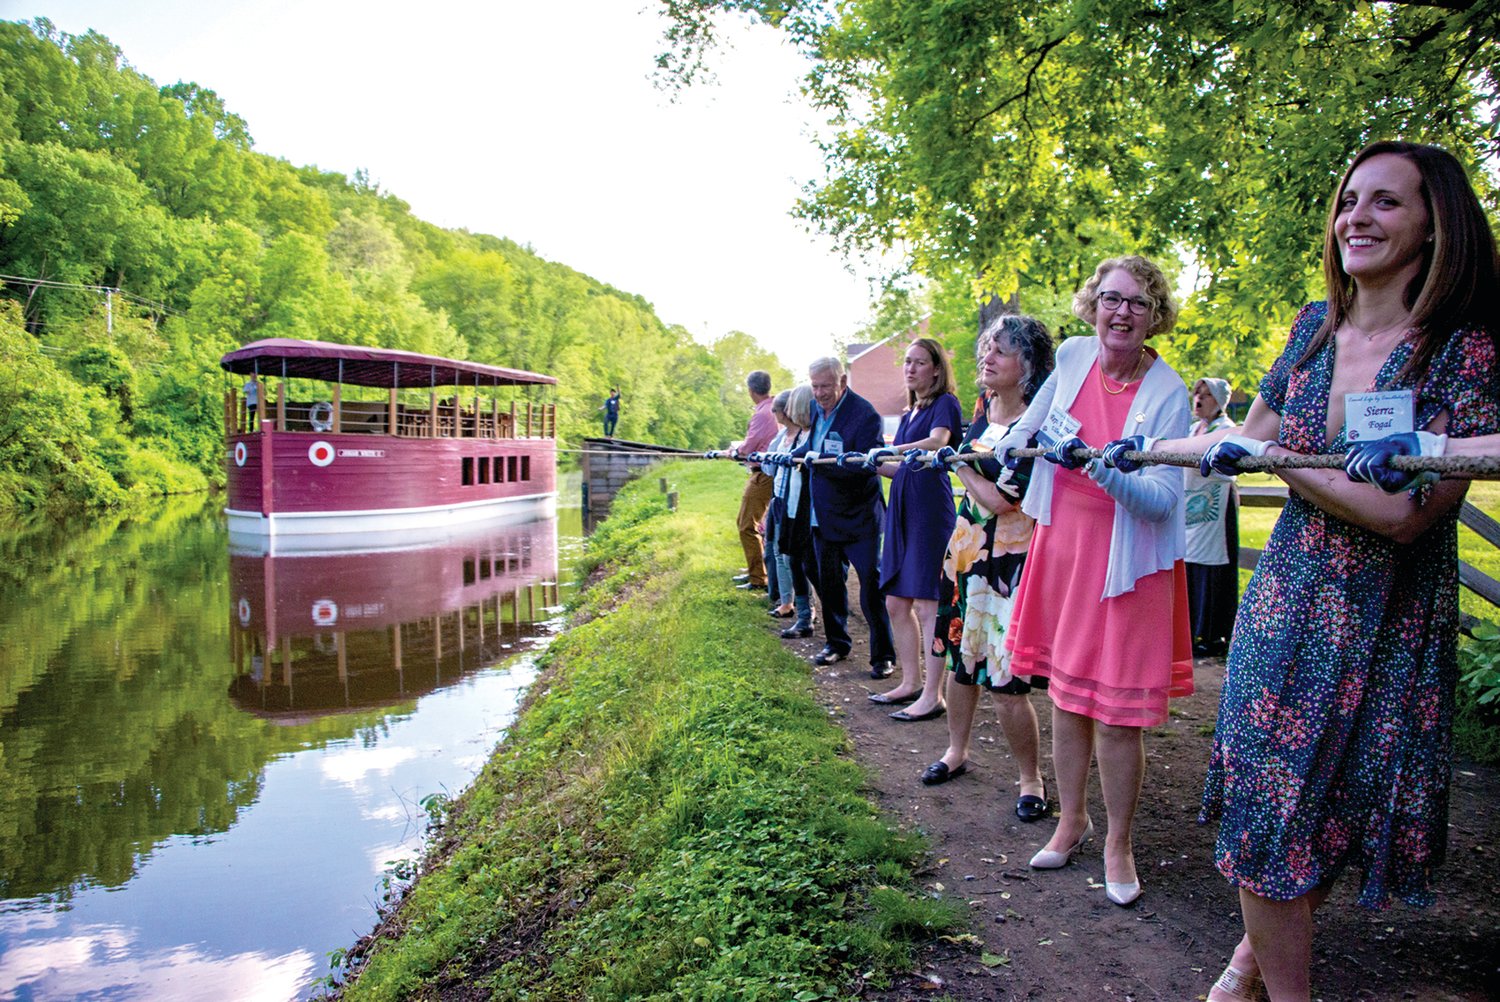 Sierra Fogal, board vice chair, and state Rep. Wendy Ullman and other guests see what it is like to pull the canal boat.  Photograph by Chiara Chandoha.